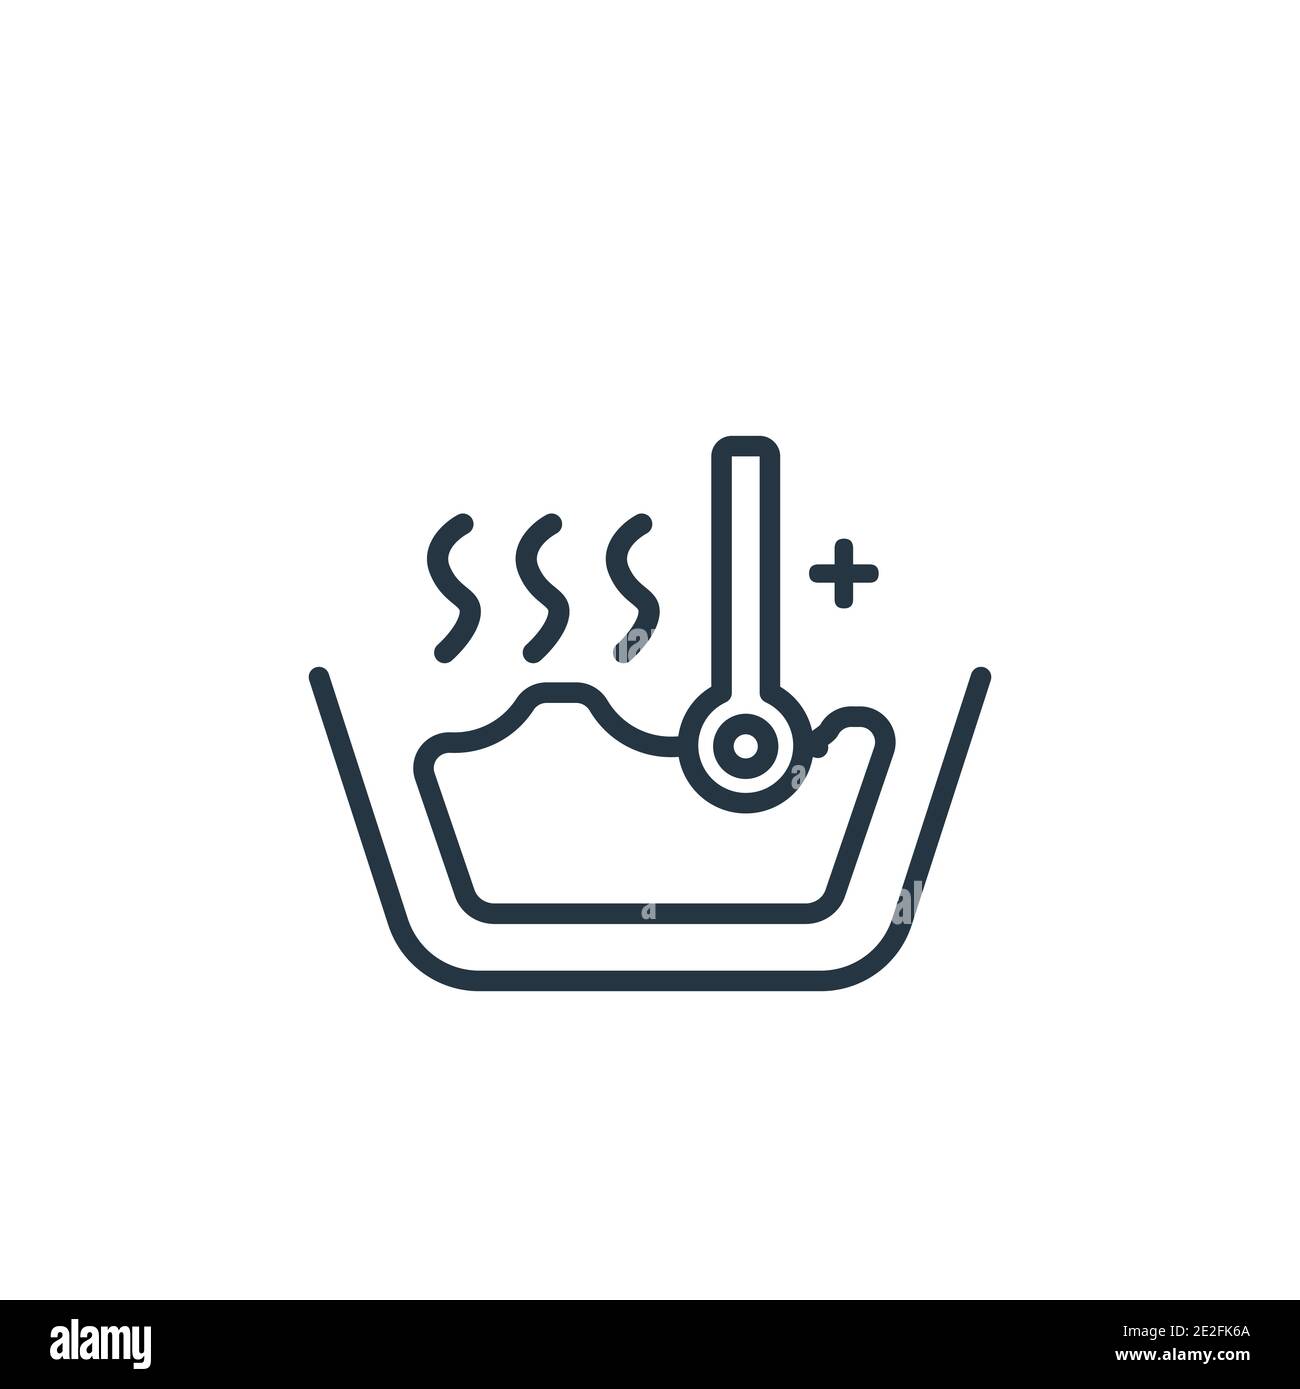 https://c8.alamy.com/comp/2E2FK6A/hot-water-outline-vector-icon-thin-line-black-hot-water-icon-flat-vector-simple-element-illustration-from-editable-cleaning-concept-isolated-stroke-2E2FK6A.jpg